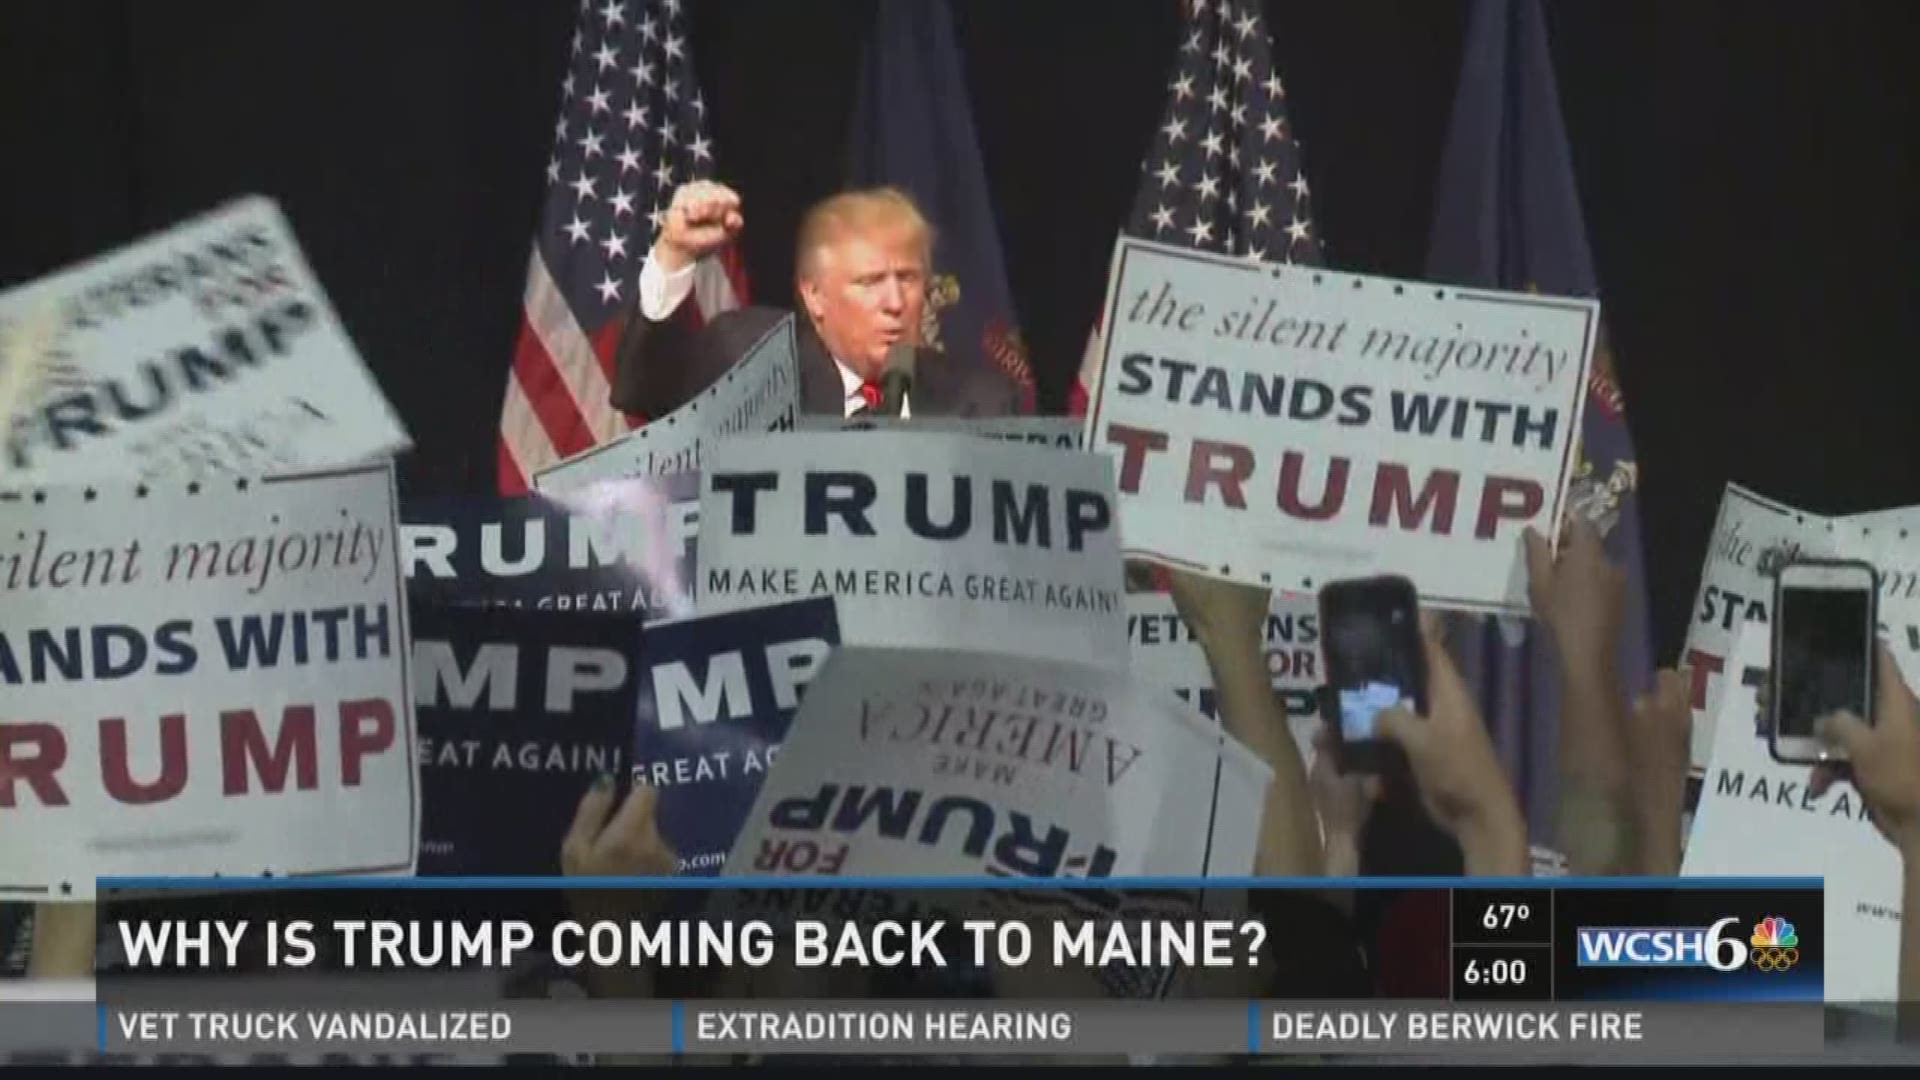 Why is Trump coming back to Maine?